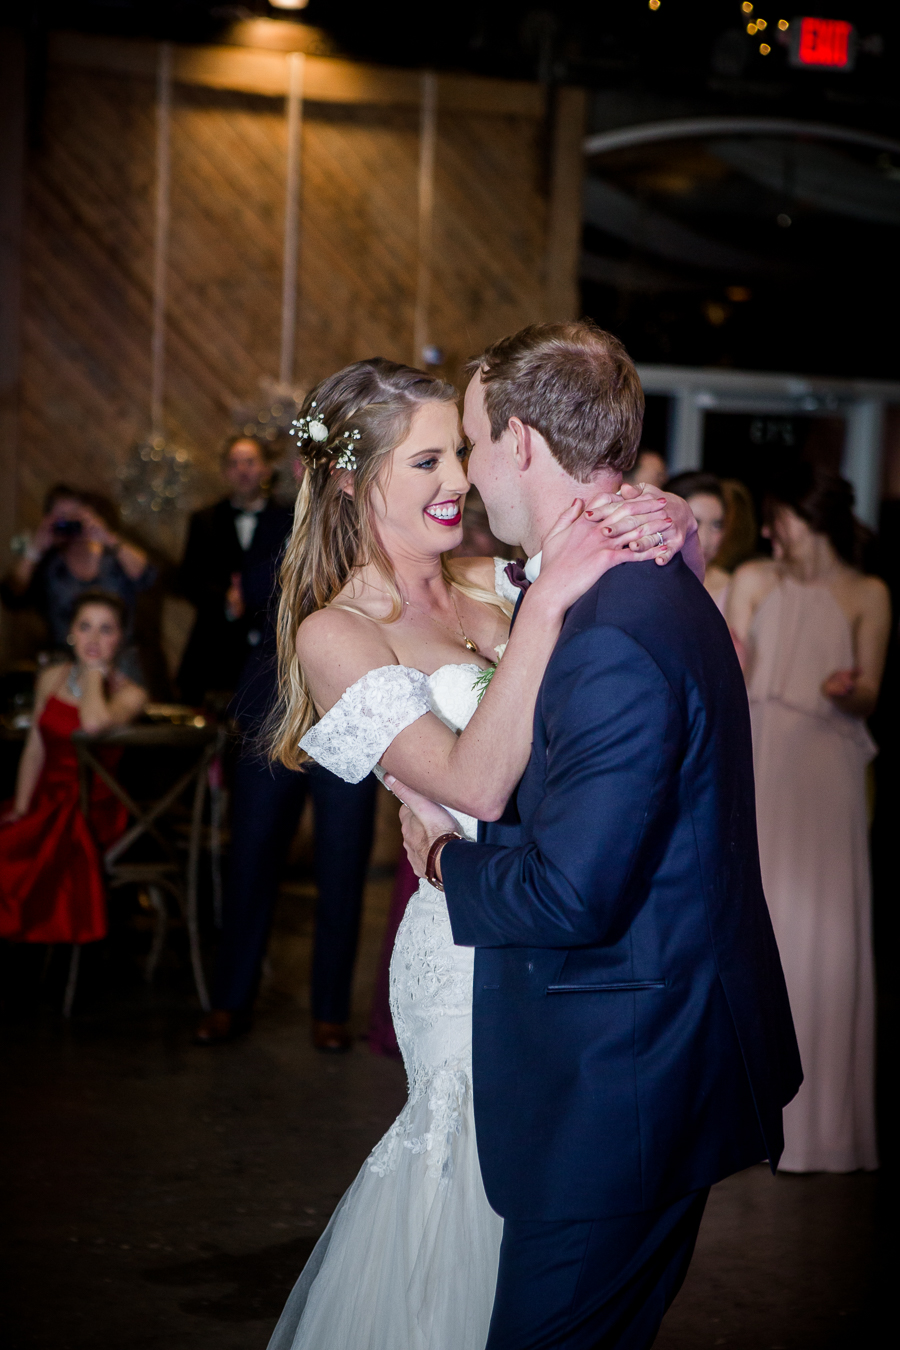 Her hands wrapped around his neck during the first dance during the reception pictures at this winter wedding at Knoxville Wedding Venue, Jackson Terminal, by Knoxville Wedding Photographer, Amanda May Photos.